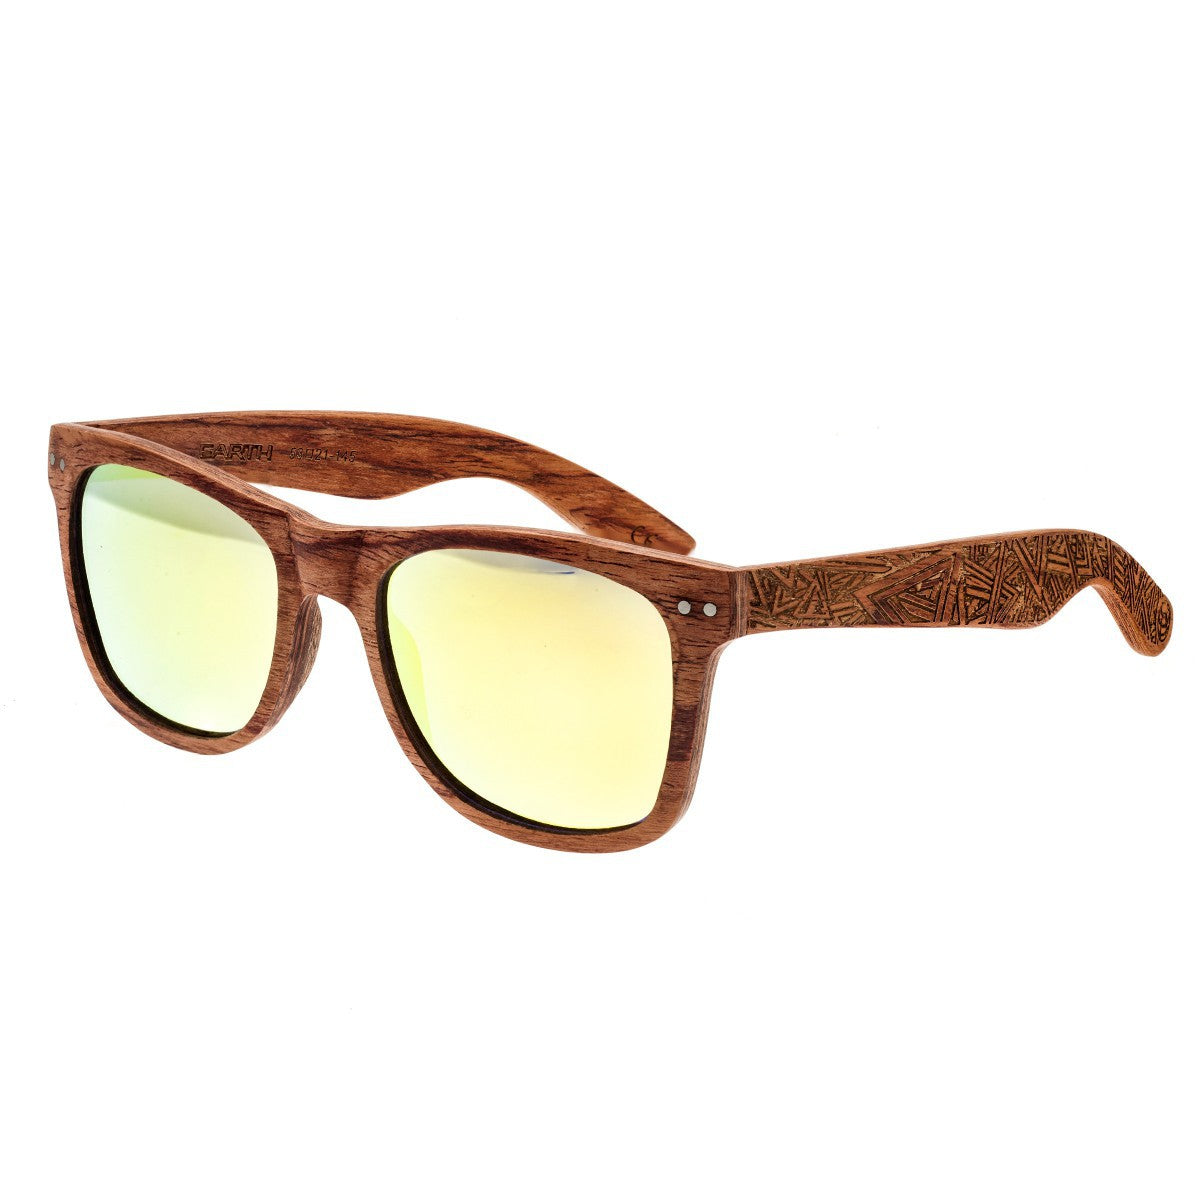 Earth Wood Cape Cod Polarized Sunglasses - Red Rosewood/Yellow - ESG060R